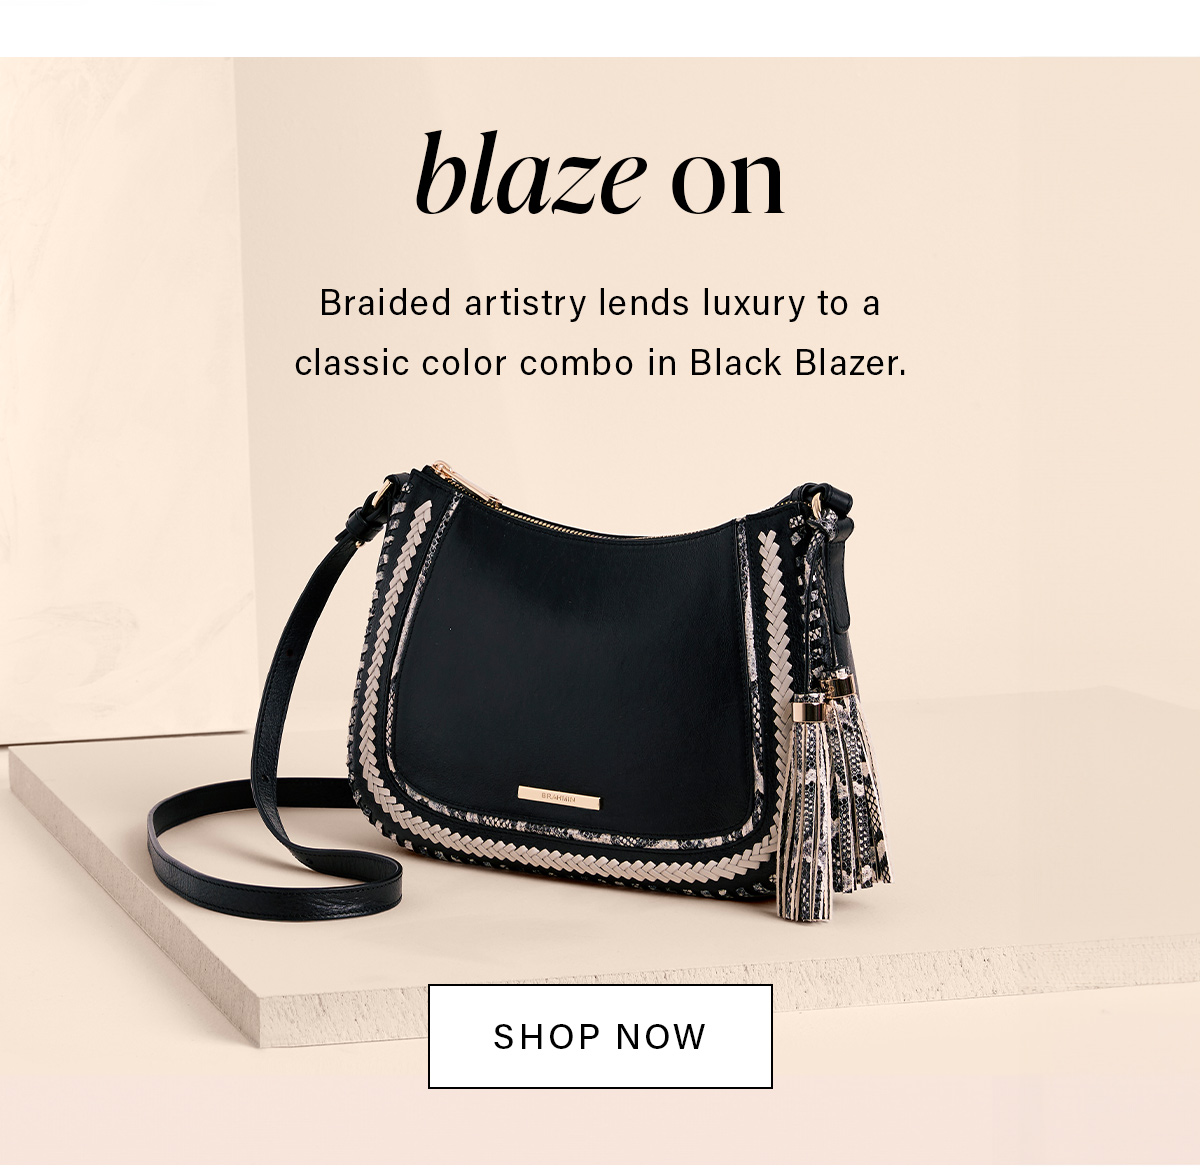 blaze on Braided artistry lends luxury to a classic color combo in Black Blazer. SHOP NOW